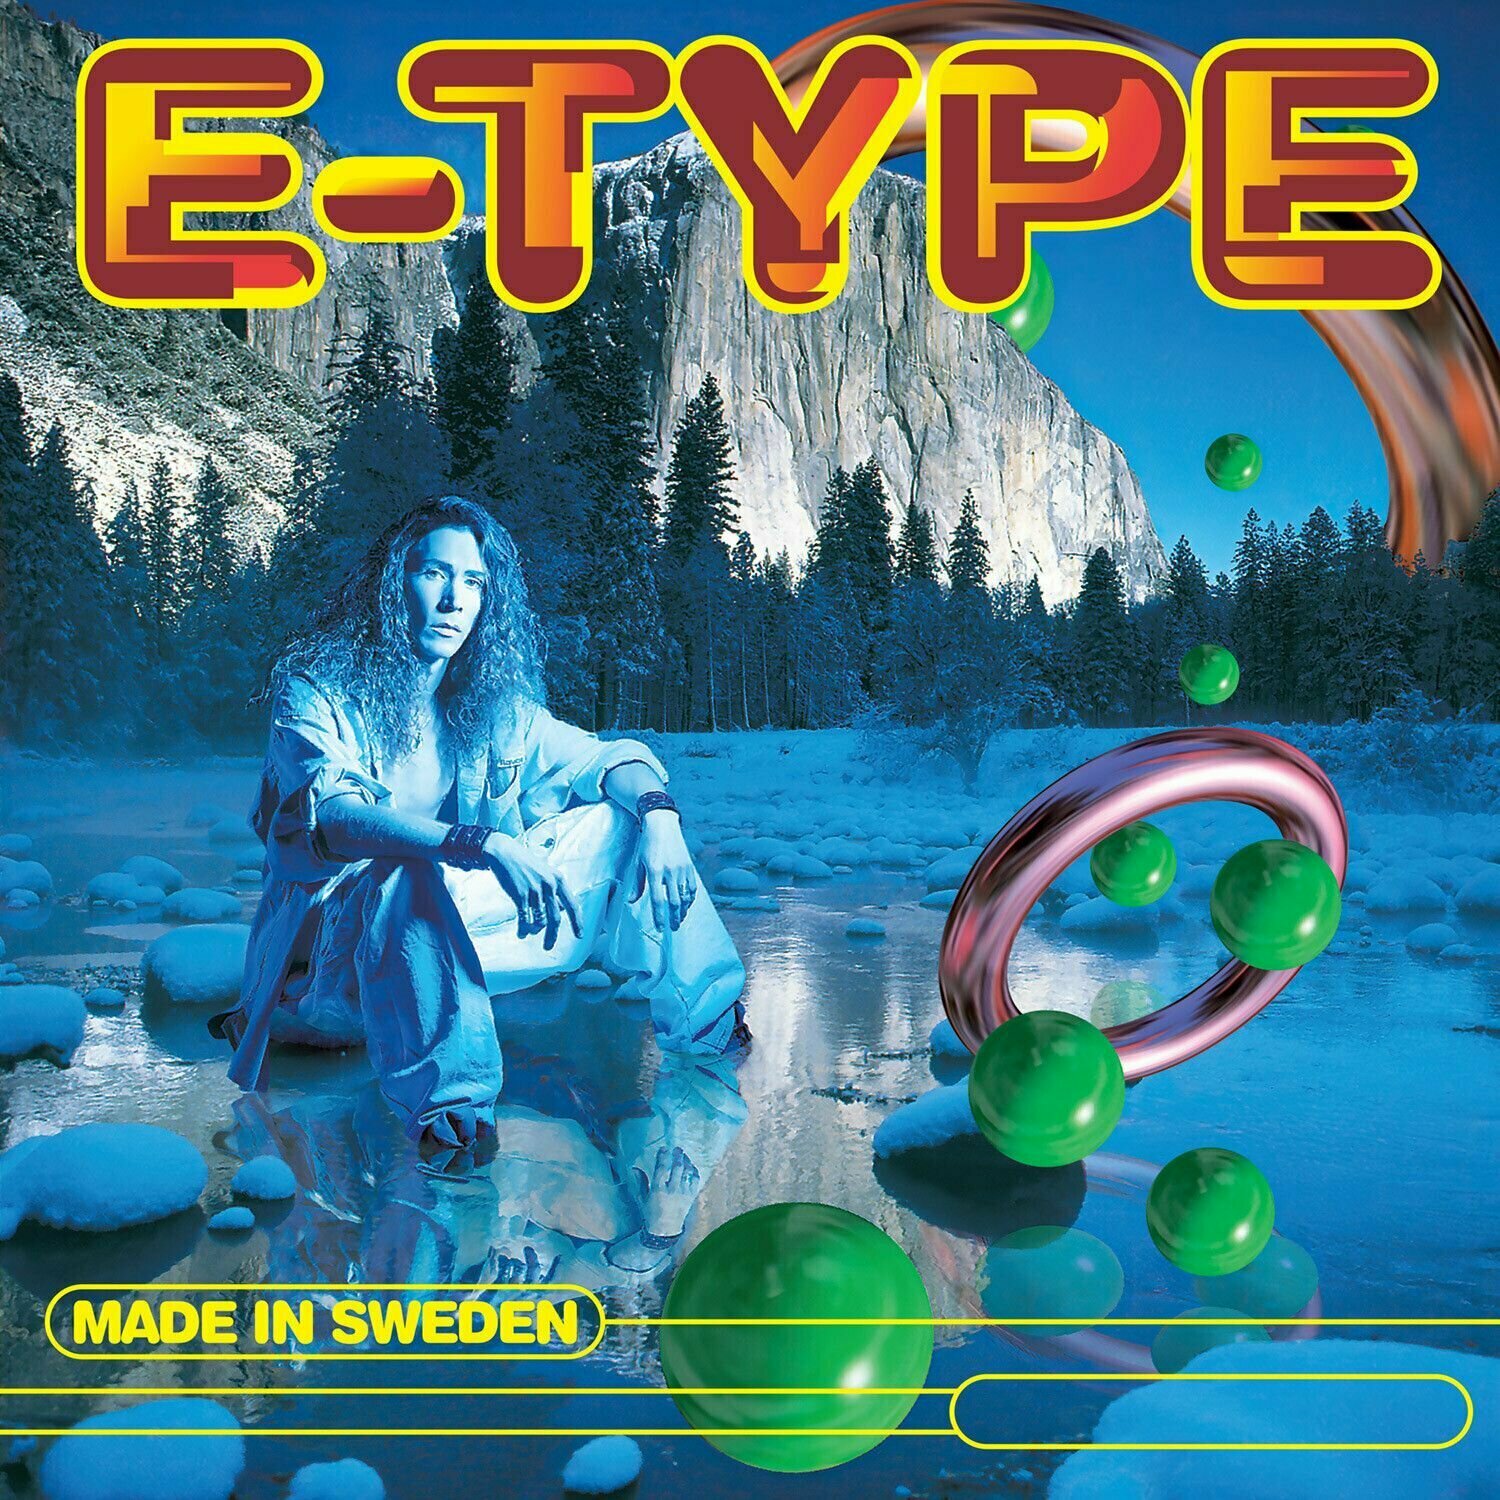 Виниловая пластинка E-Type. Made In Sweden (LP, Limited Edition, Remastered, Clear Blue Vinyl)